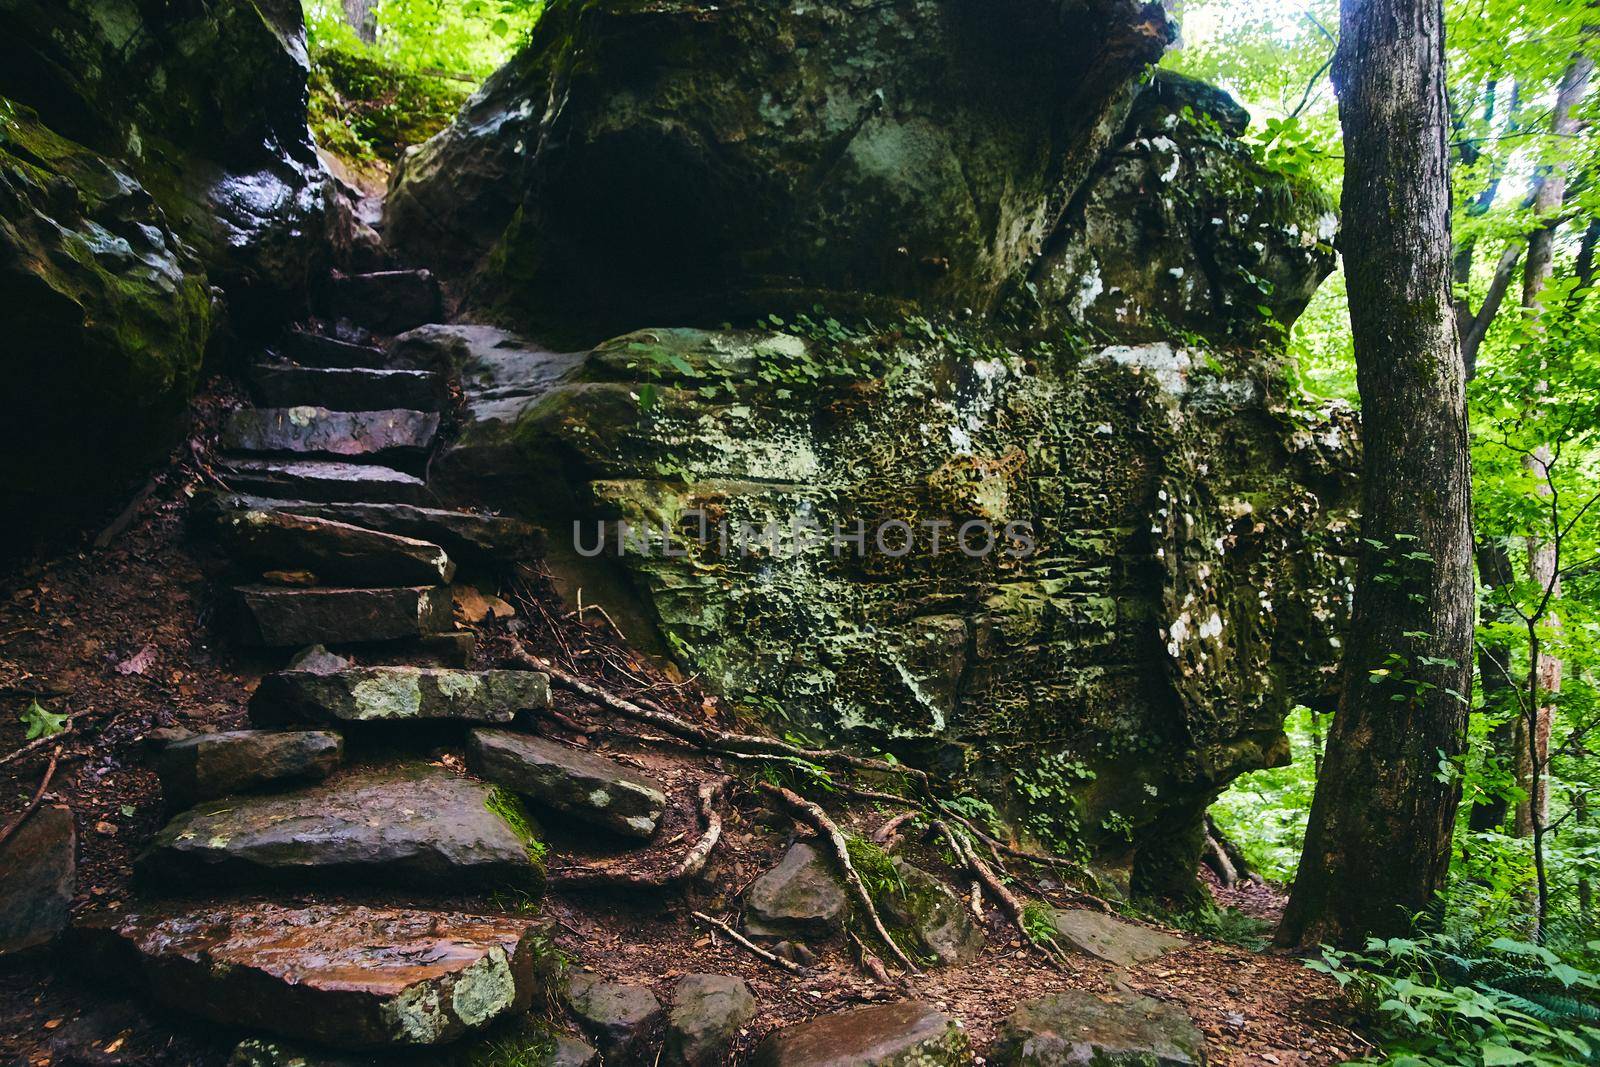 Hiking trail of stone steps up into rocks covered in lichen by njproductions